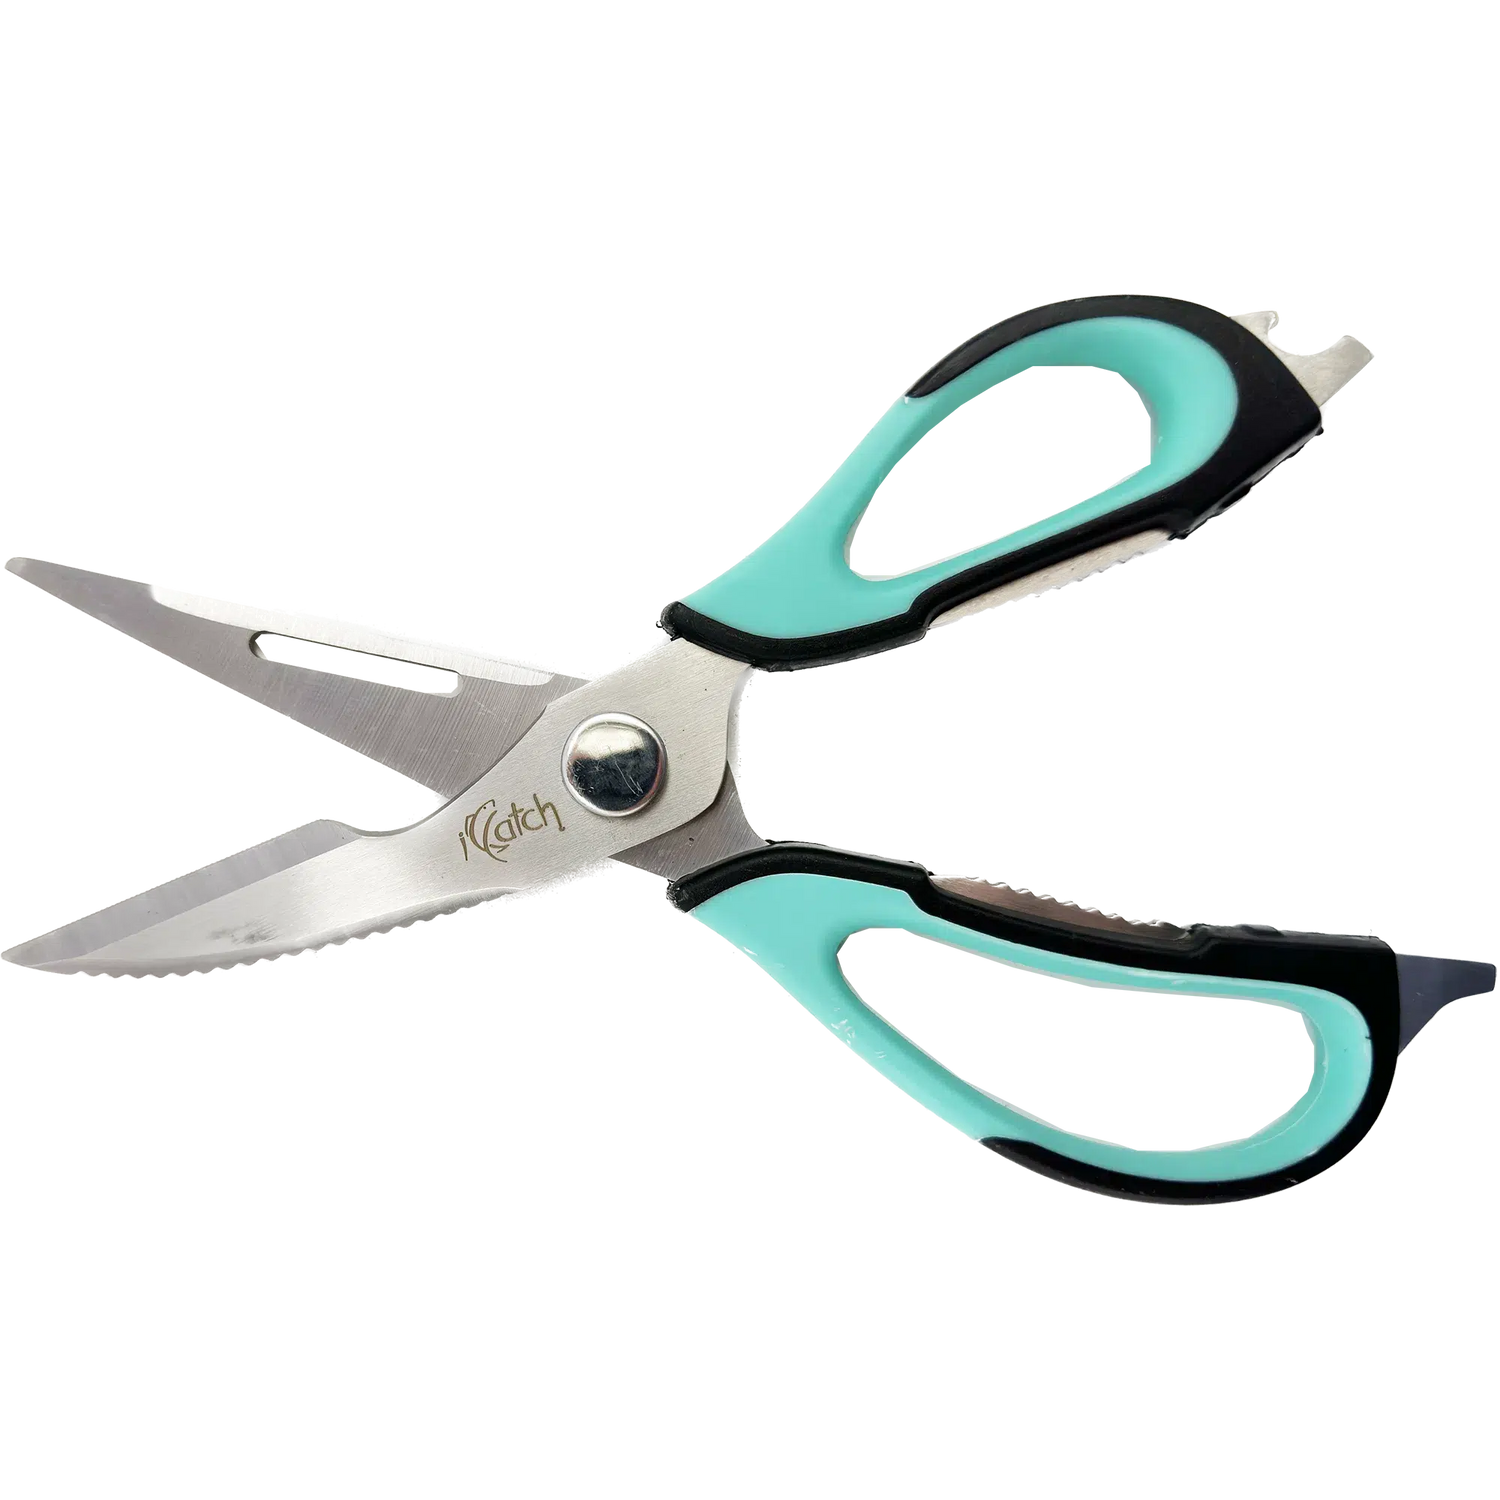 ICatch Stainless Steel Bait Shears – Fishing Station